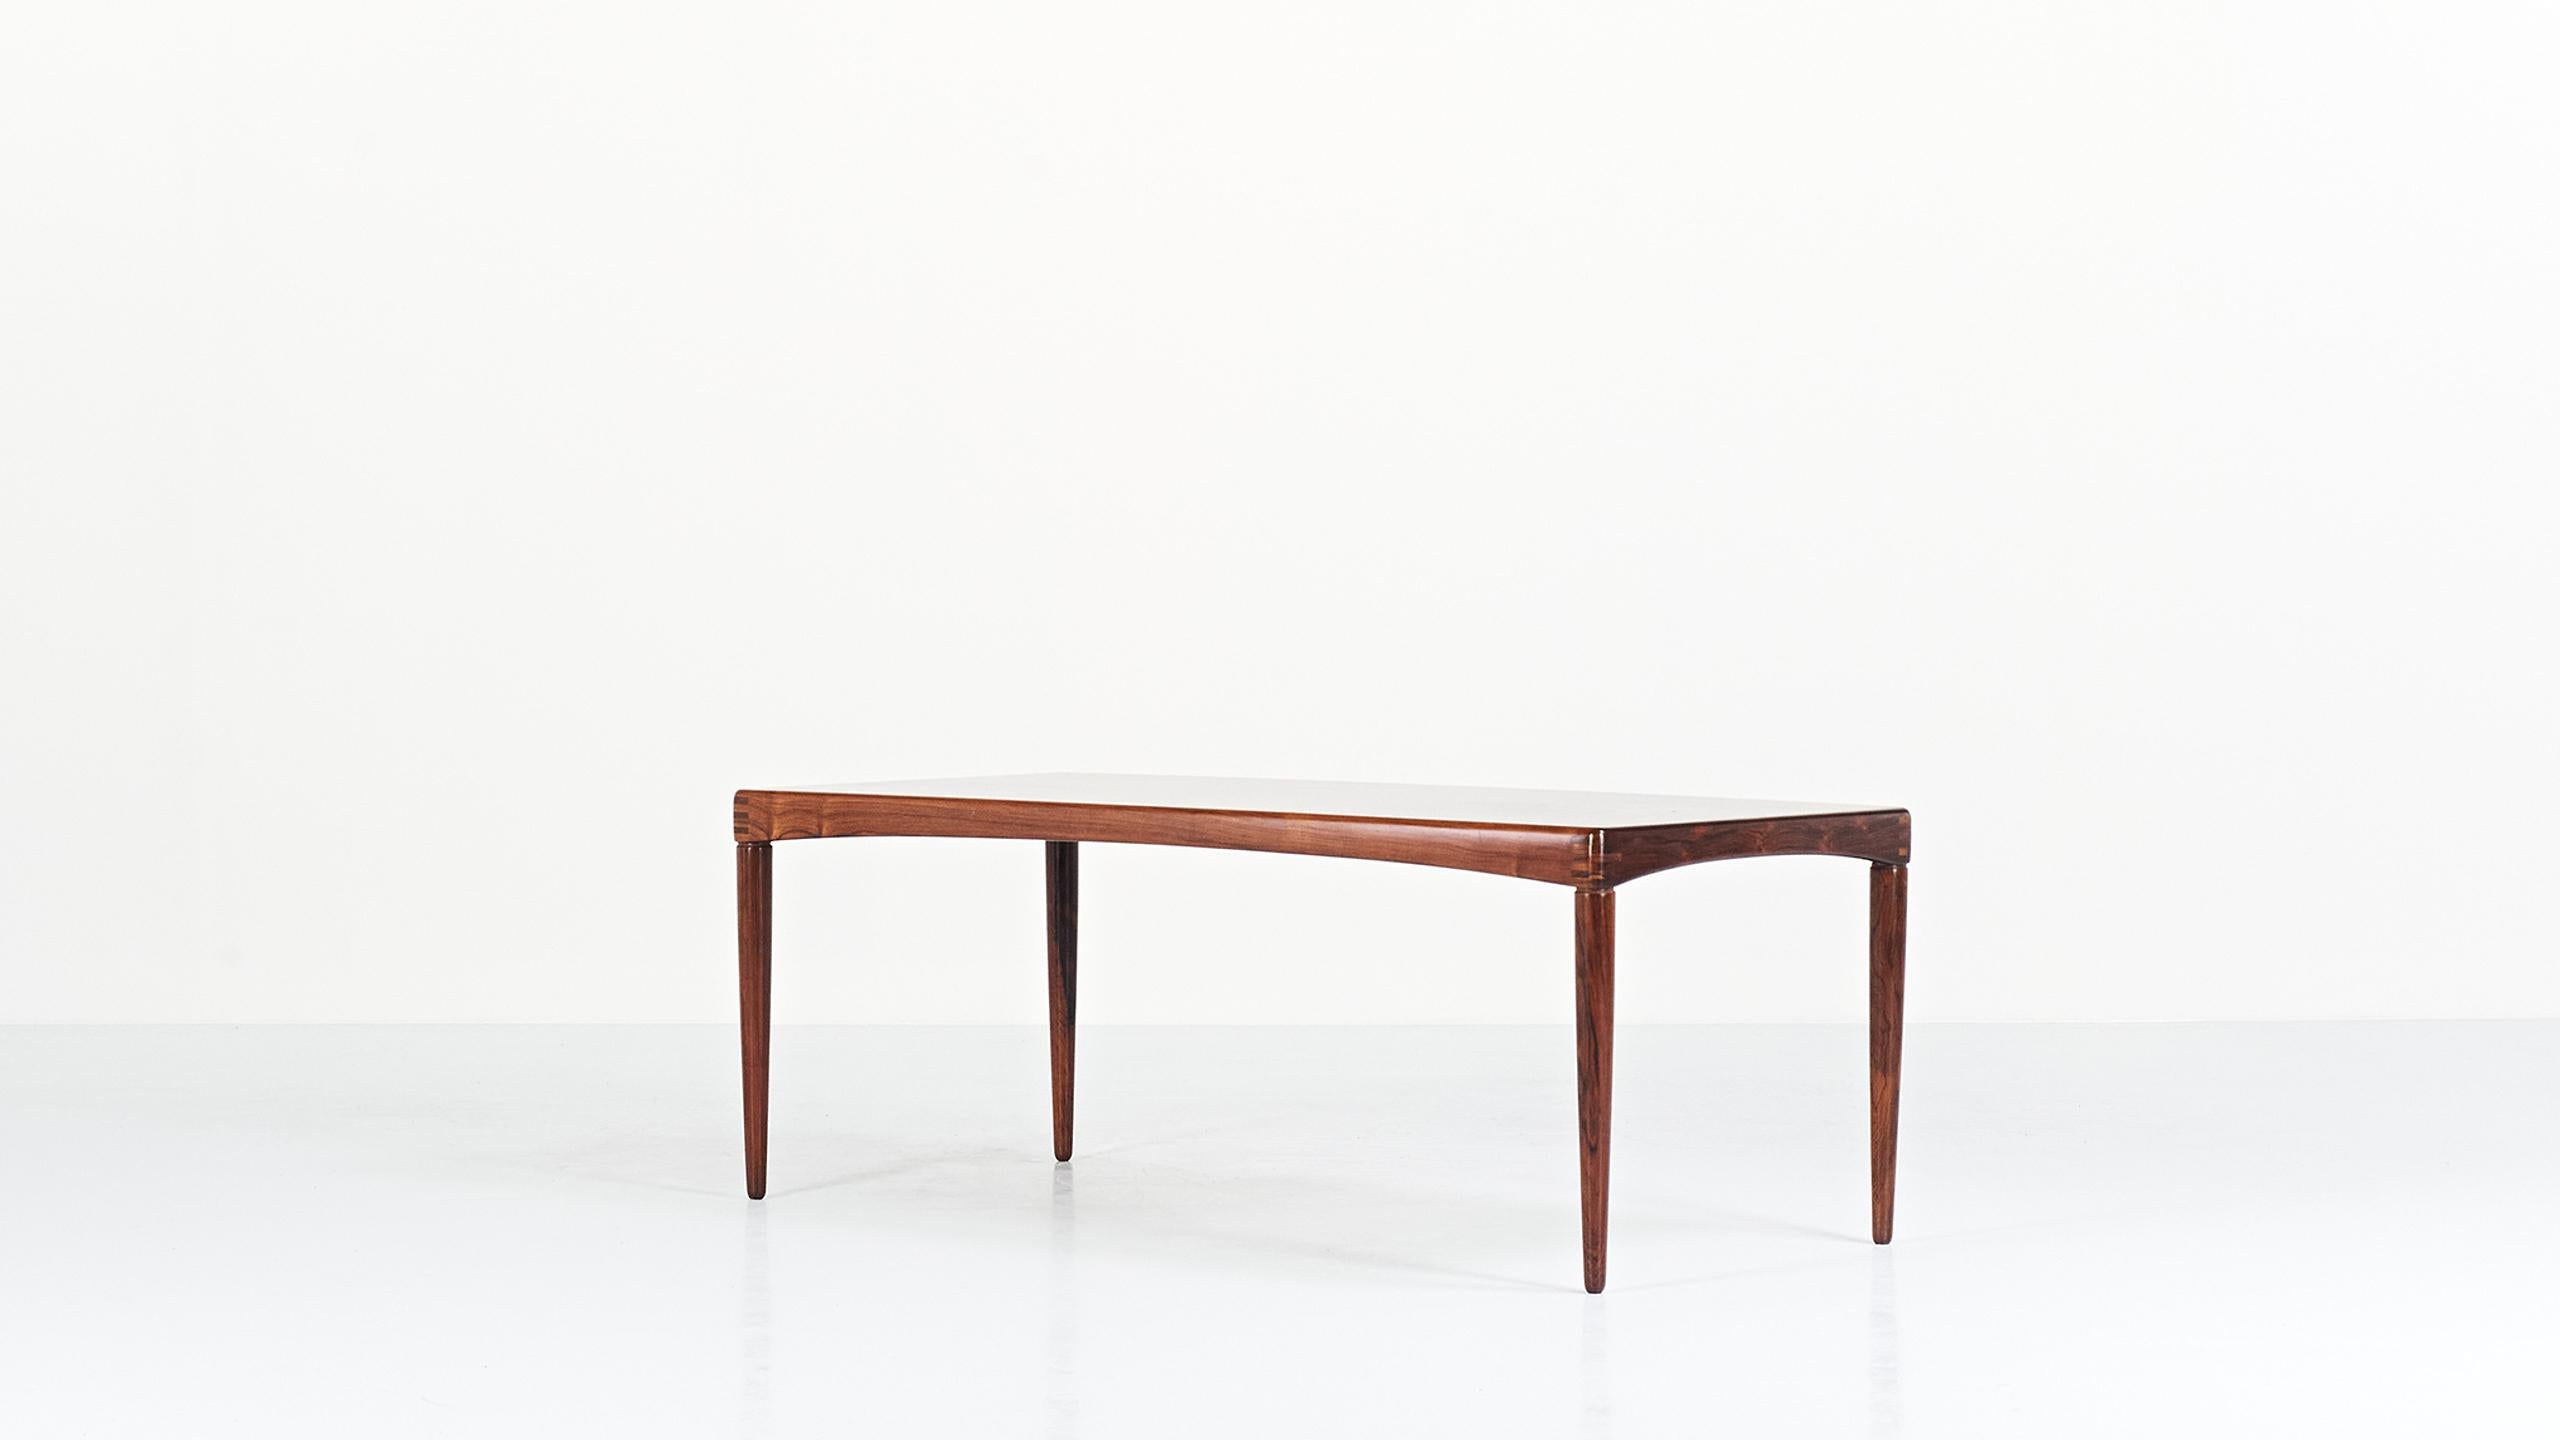 Rare coffee table in rosewood veneer and solid rosewood, by the Norwegian designer Henry Walter Klein for Bramin. Superb finishes. Labeled and dated July 5, 1968. Very slight traces of use, very good condition.